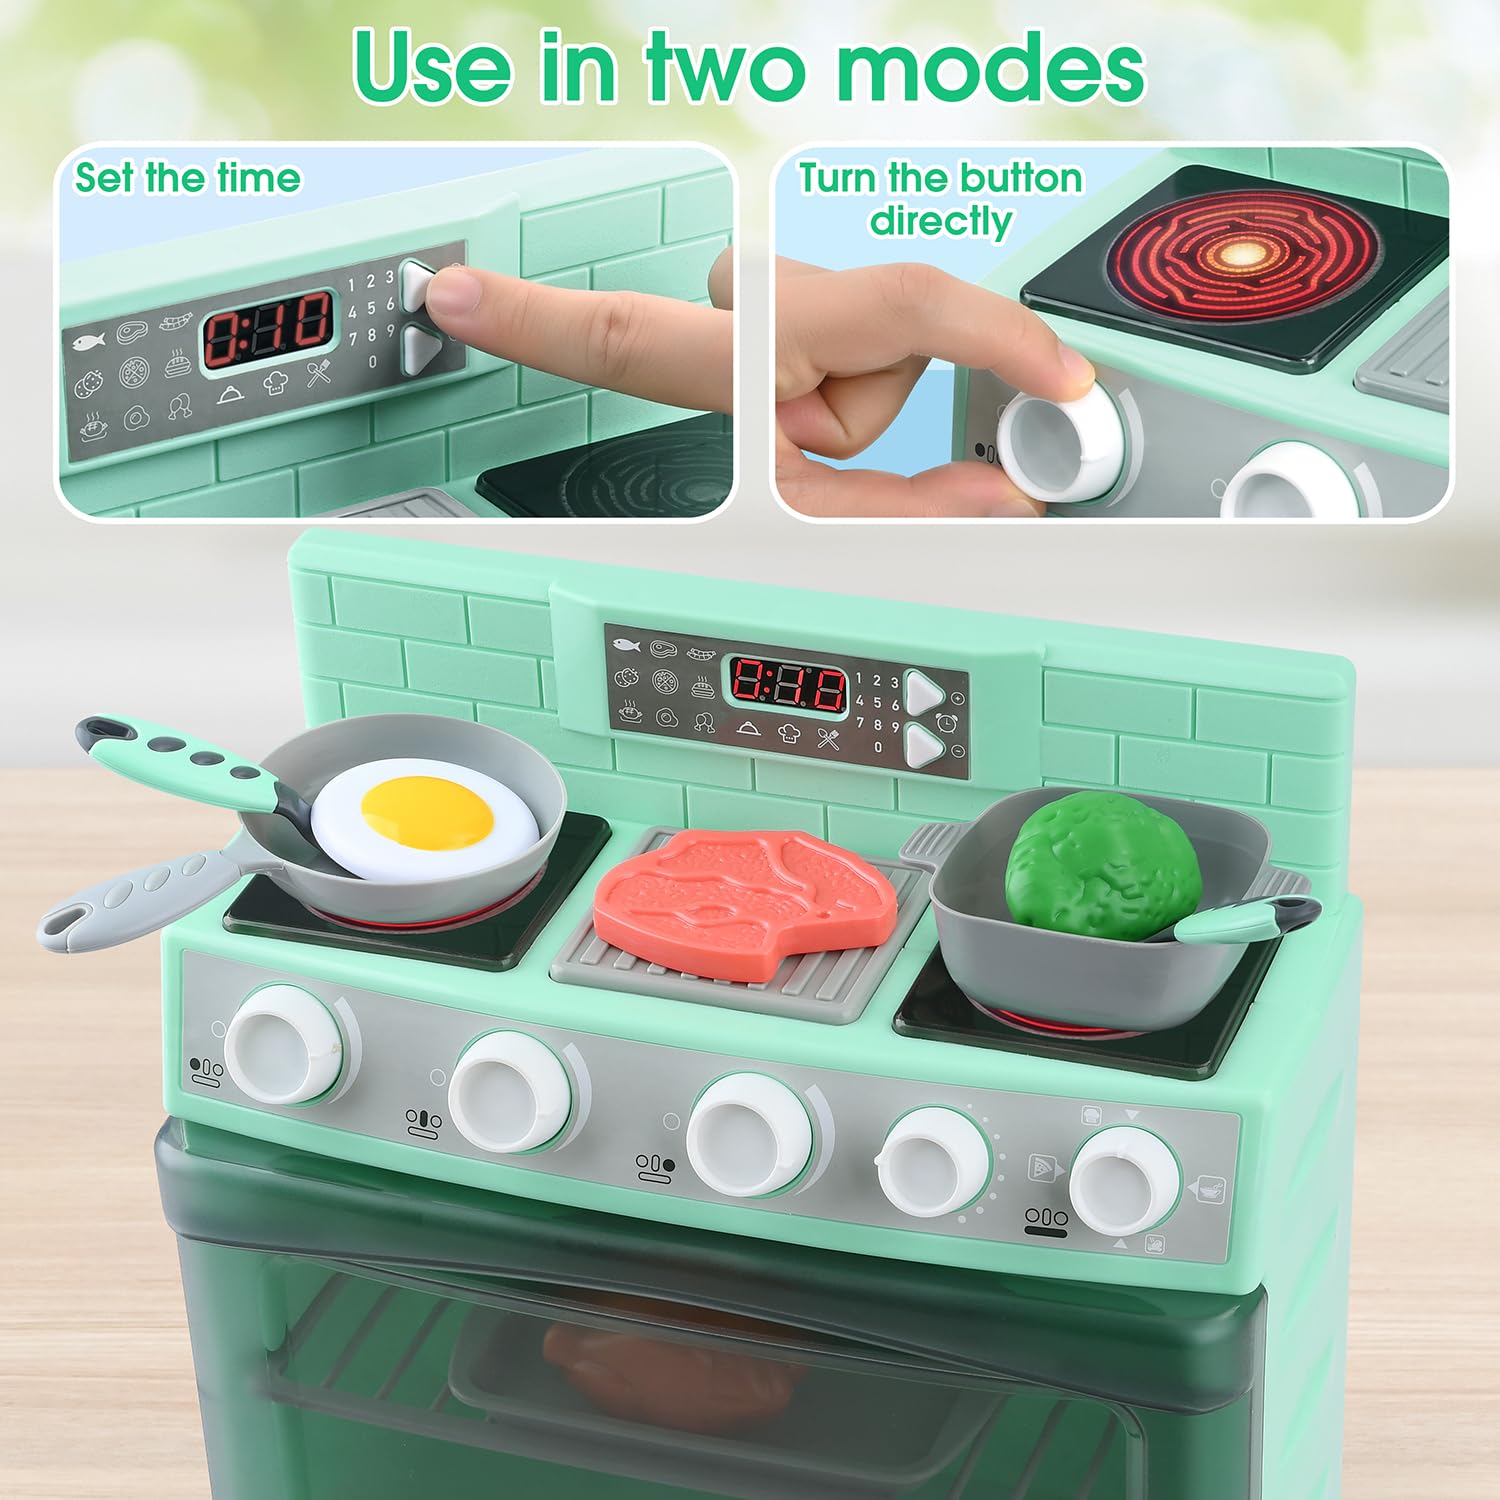 Toy Oven Play Kitchen Accessories - Realistic Pretend Play Appliance for Kids with Lights & Sounds, Unique Kids Kitchen Playset Play Food Toddler Learning Toys for Boys Girls Gift Birthday Christmas